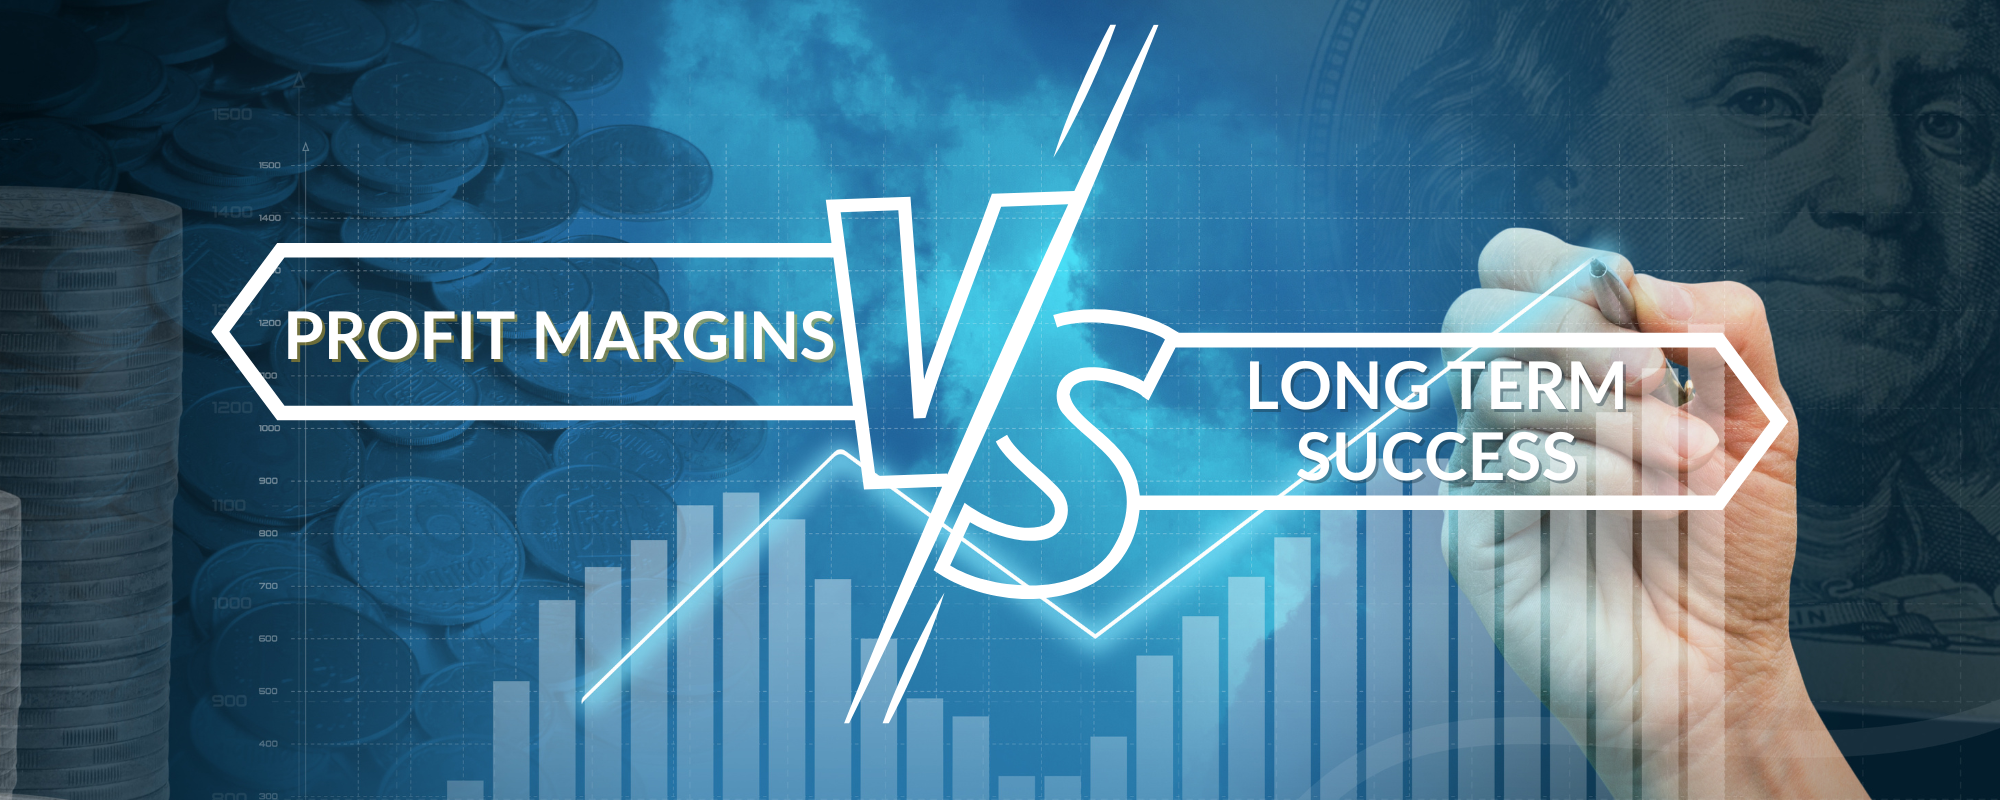 Profit margins vs long term success - Beyond Profits: Why Brands Need to Consider More Than Just Margins